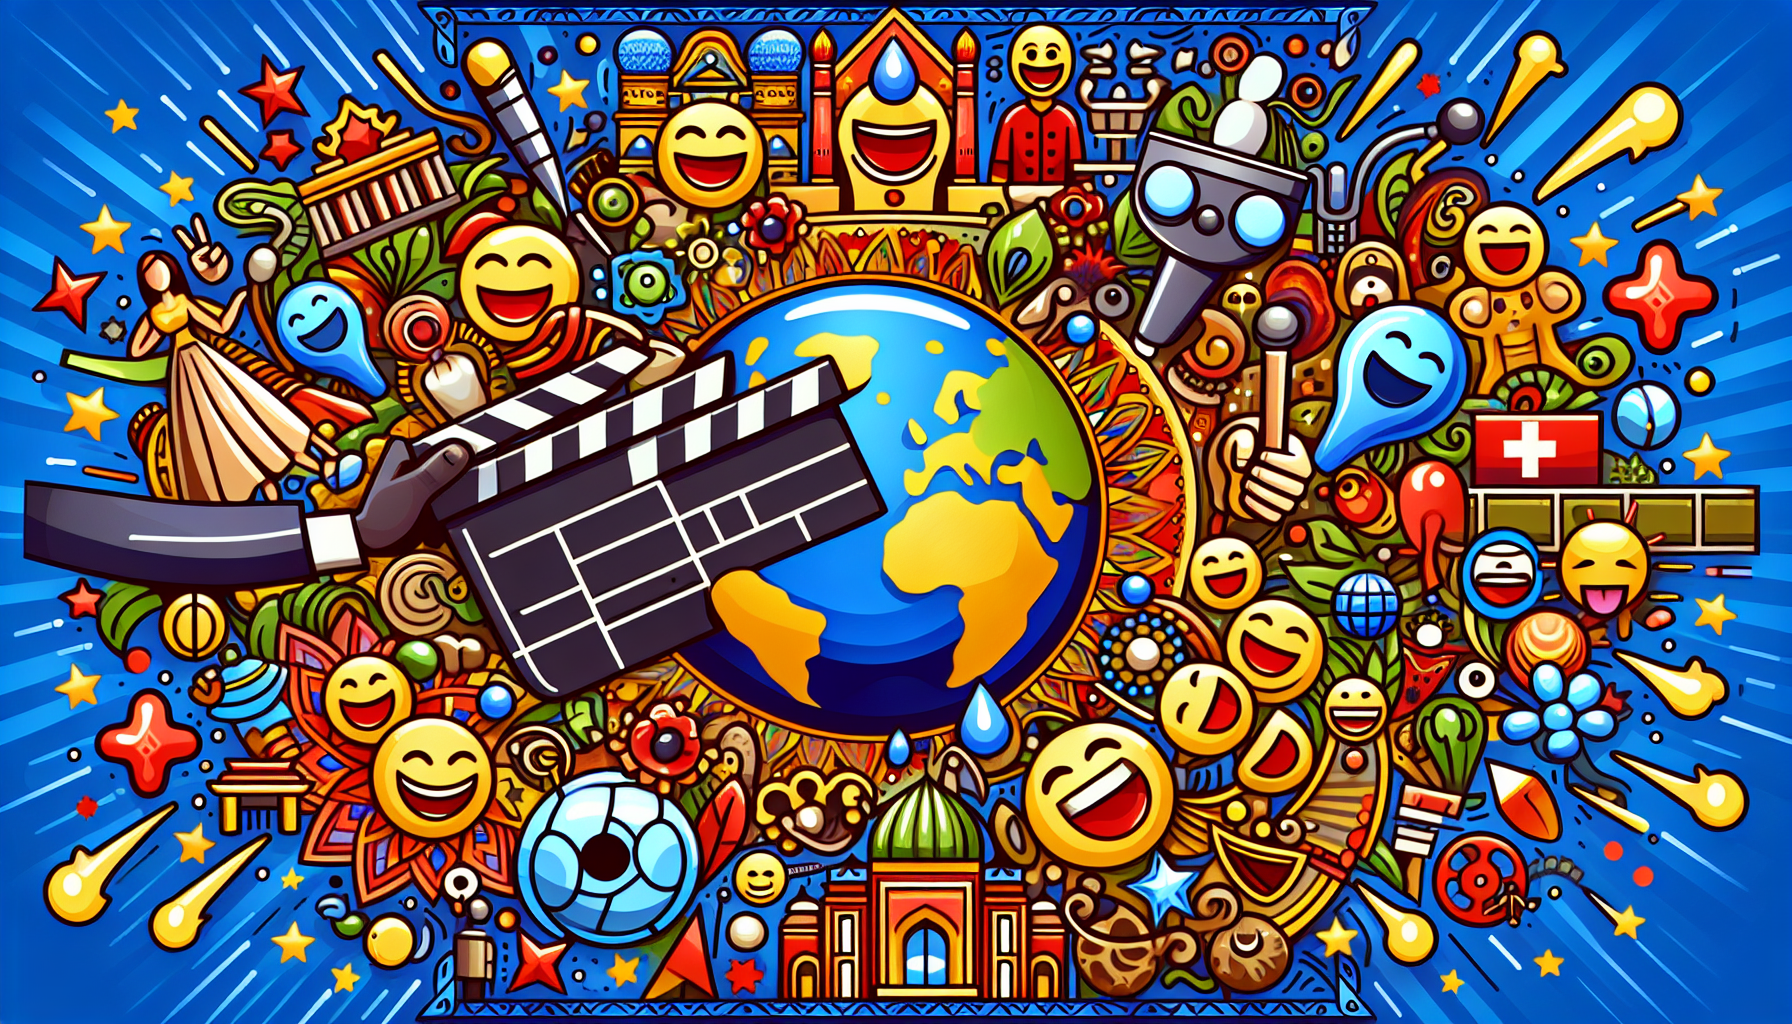 Illustrate a symbolic image depicting the concept of crafting comedy movies for a global audience. Include vibrant colors, cartoon-like styles, and contemporary elements like a film clapper, a globe dotted with laugh emojis, and various nationally identifiable symbols like monuments or traditional clothing to signify different regions. Make the overall atmosphere jovial and laughter-filled, reflecting the humor and joy that comedy movies bring to their audiences worldwide.